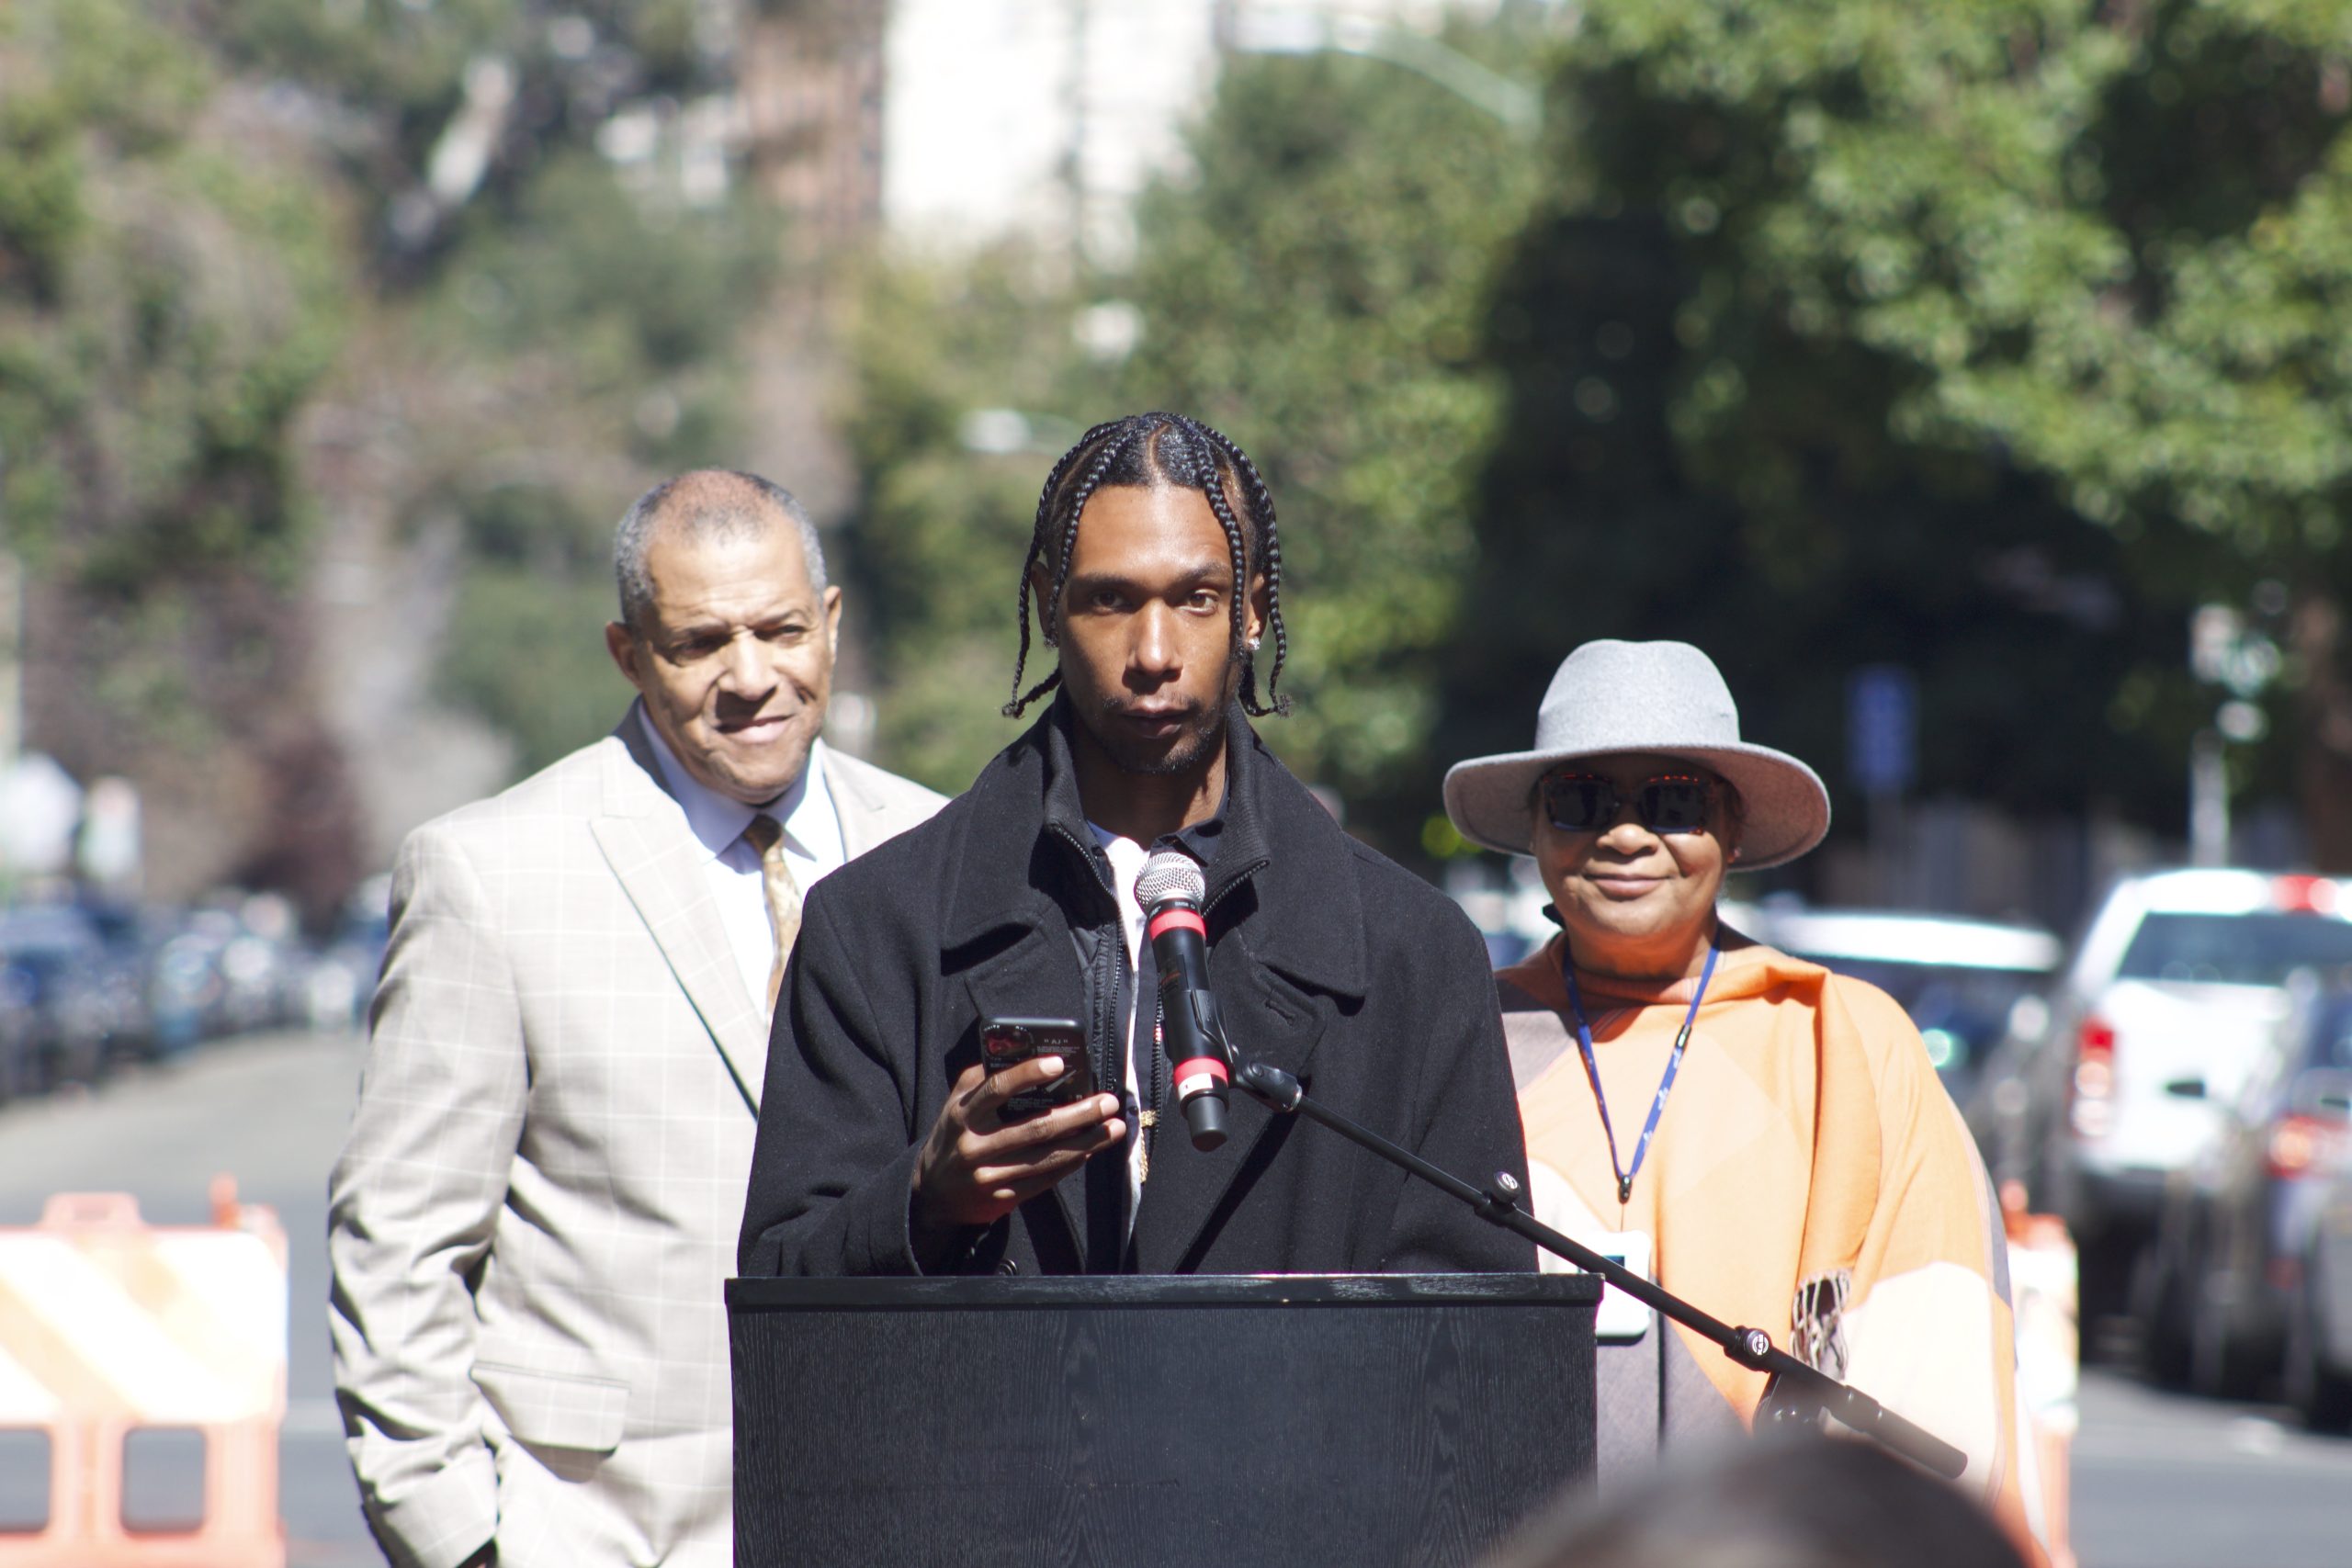 A Black man in an off white suit, a young Black man wearing a black jacket, and Black woman with sunglasses, smiling, in grey hat stand outside in front of podium